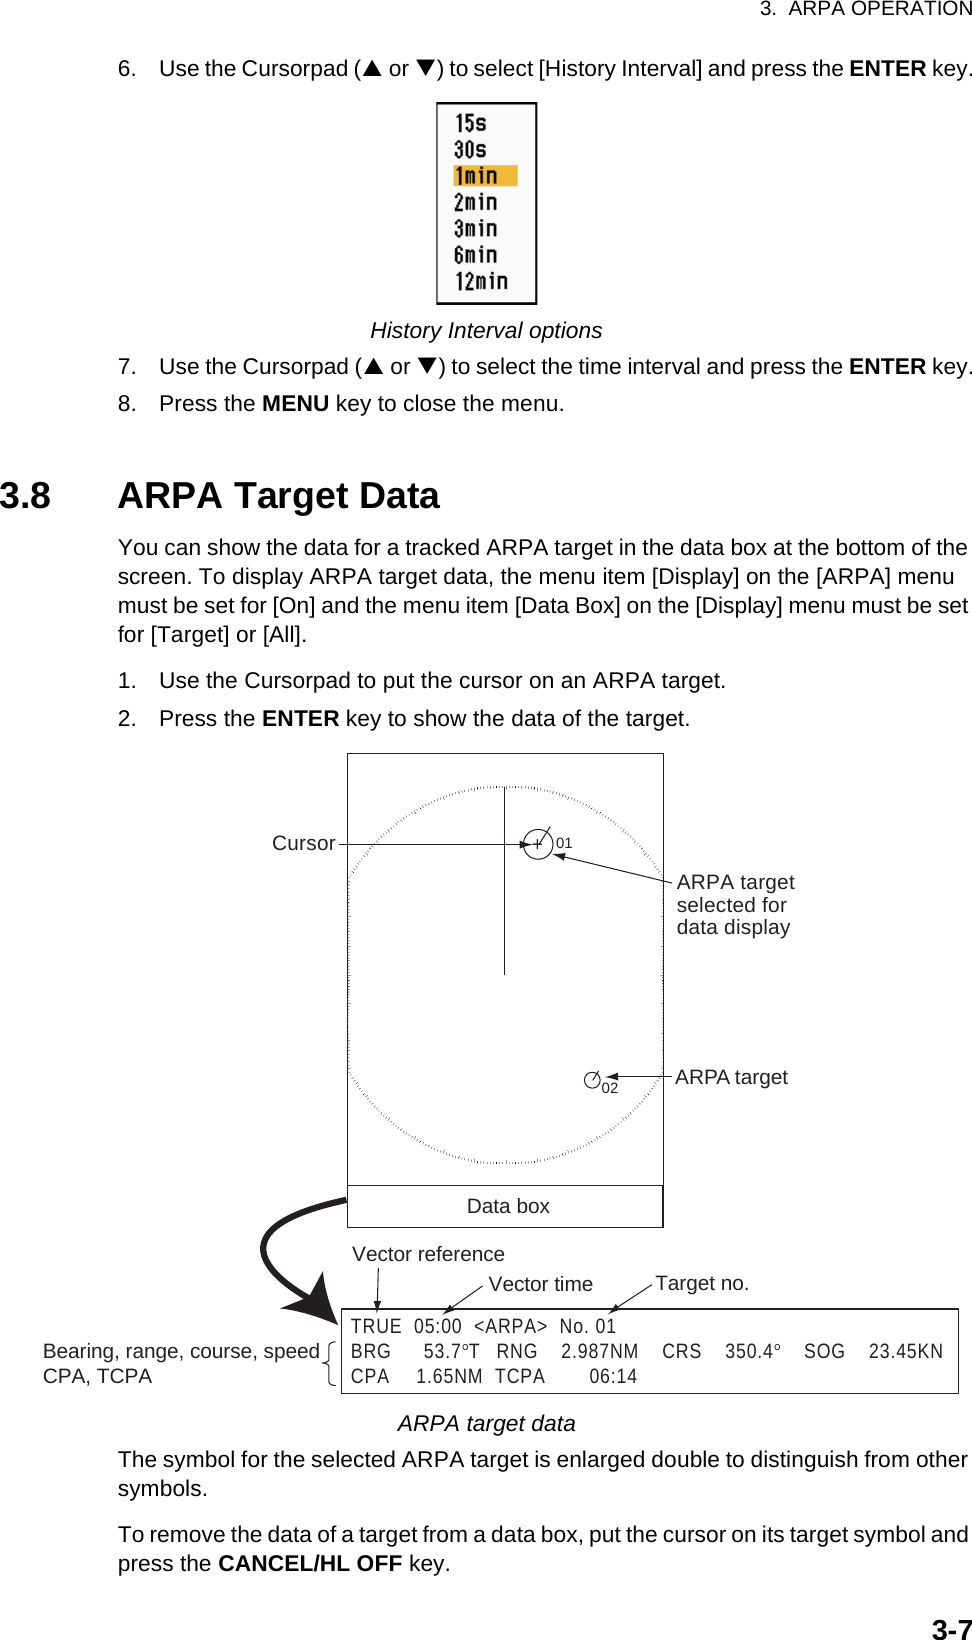 3.  ARPA OPERATION3-76. Use the Cursorpad (S or T) to select [History Interval] and press the ENTER key.History Interval options7. Use the Cursorpad (S or T) to select the time interval and press the ENTER key.8. Press the MENU key to close the menu.3.8 ARPA Target DataYou can show the data for a tracked ARPA target in the data box at the bottom of the screen. To display ARPA target data, the menu item [Display] on the [ARPA] menu must be set for [On] and the menu item [Data Box] on the [Display] menu must be set for [Target] or [All].1. Use the Cursorpad to put the cursor on an ARPA target.2. Press the ENTER key to show the data of the target.ARPA target dataThe symbol for the selected ARPA target is enlarged double to distinguish from other symbols.To remove the data of a target from a data box, put the cursor on its target symbol and press the CANCEL/HL OFF key.TRUE  05:00  &lt;ARPA&gt;  No. 01BRG      53.7°T  RNG    2.987NM    CRS    350.4°    SOG    23.45KNCPA    1.65NM  TCPA        06:14Vector referenceVector time Target no.Bearing, range, course, speed CPA, TCPA+ARPA targetselected fordata display01ARPA targetData box02Cursor